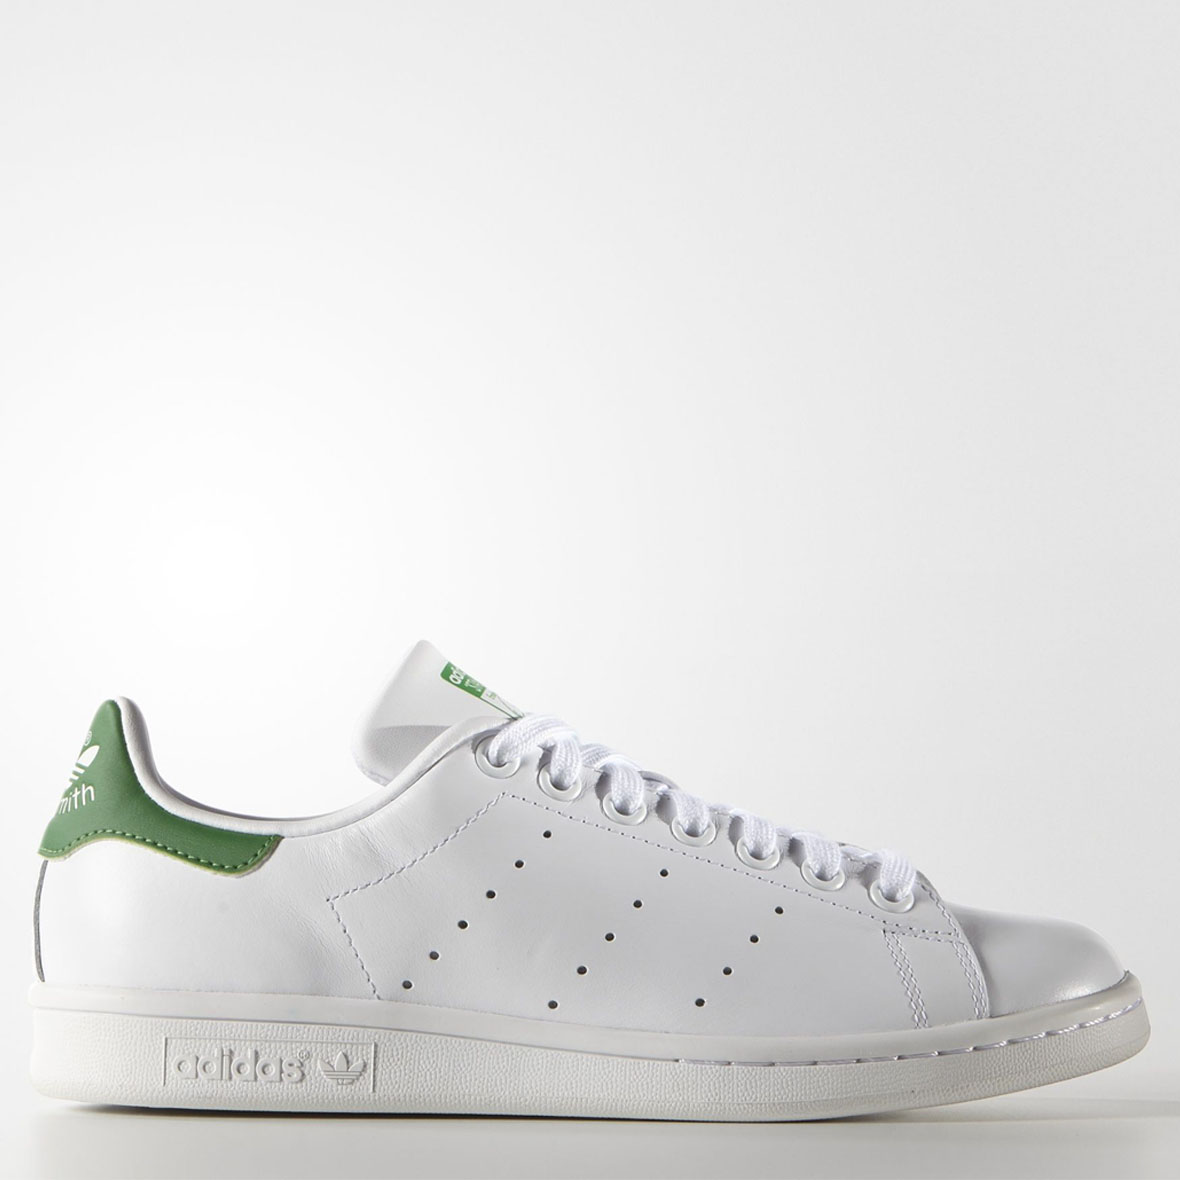 stan smith shoes canada